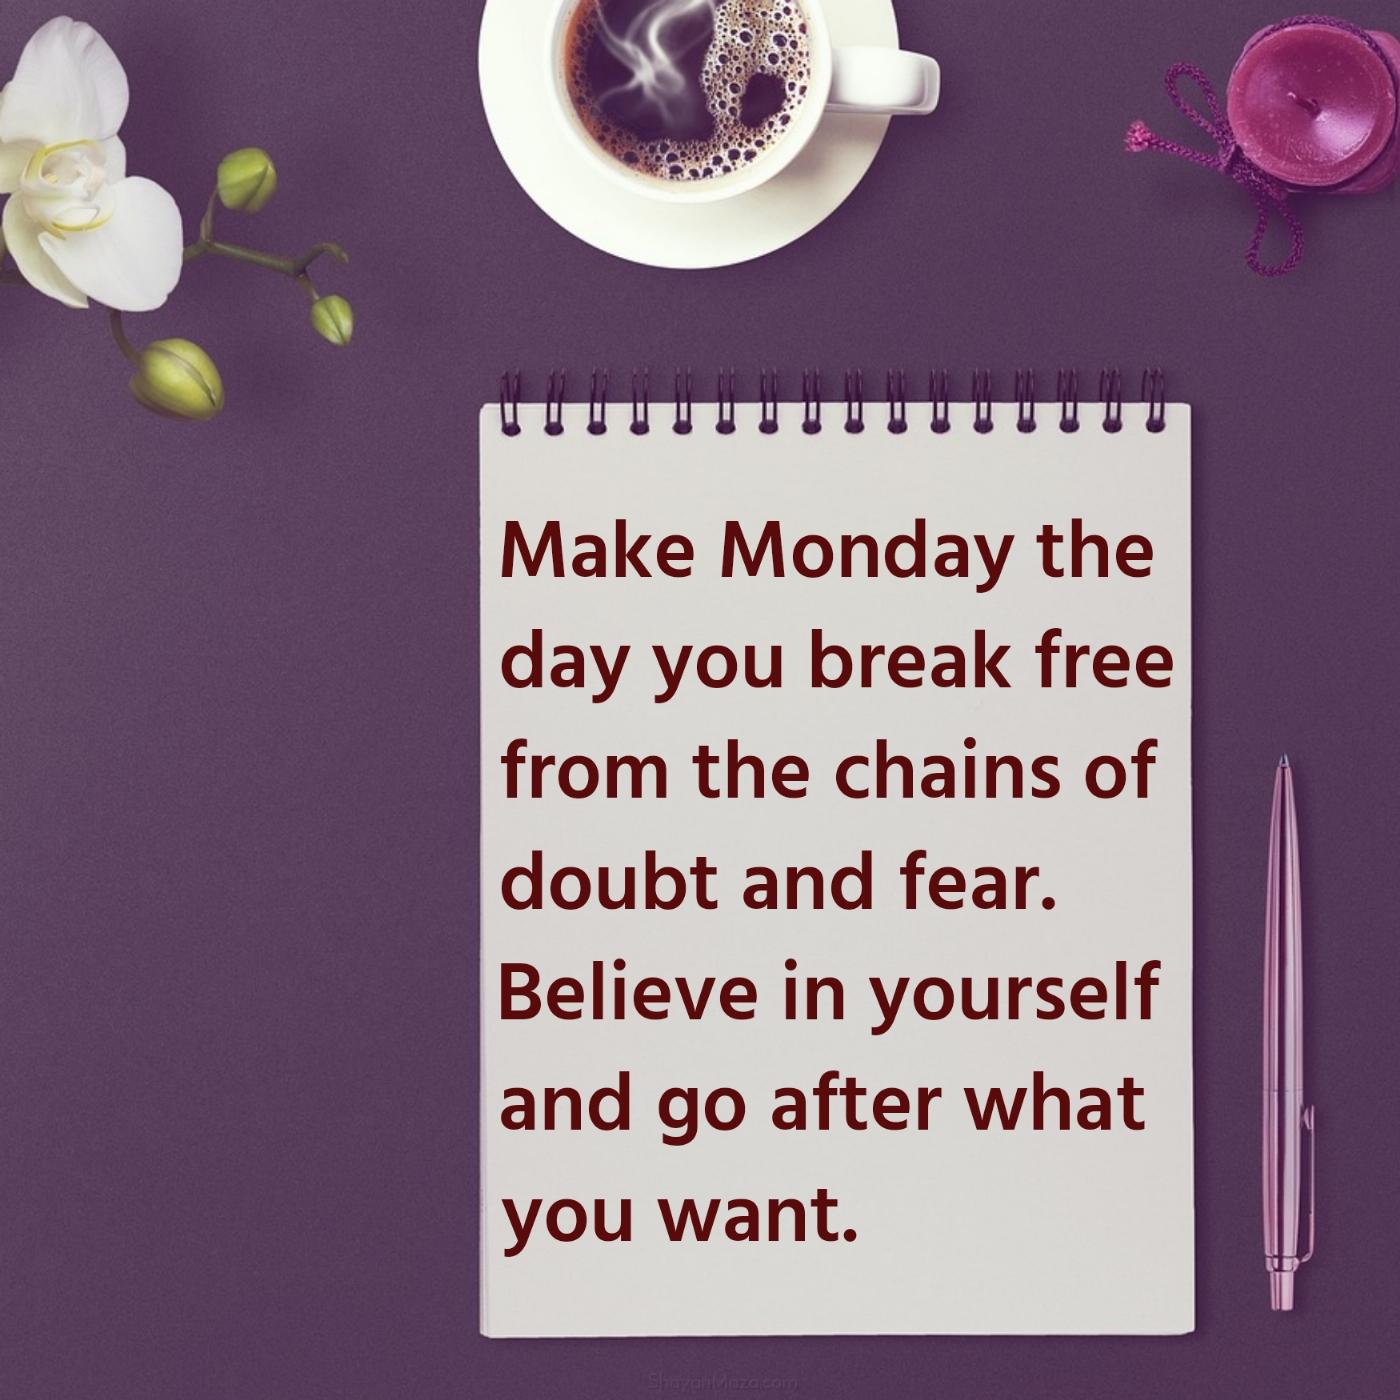 Make Monday the day you break free from the chains of doubt